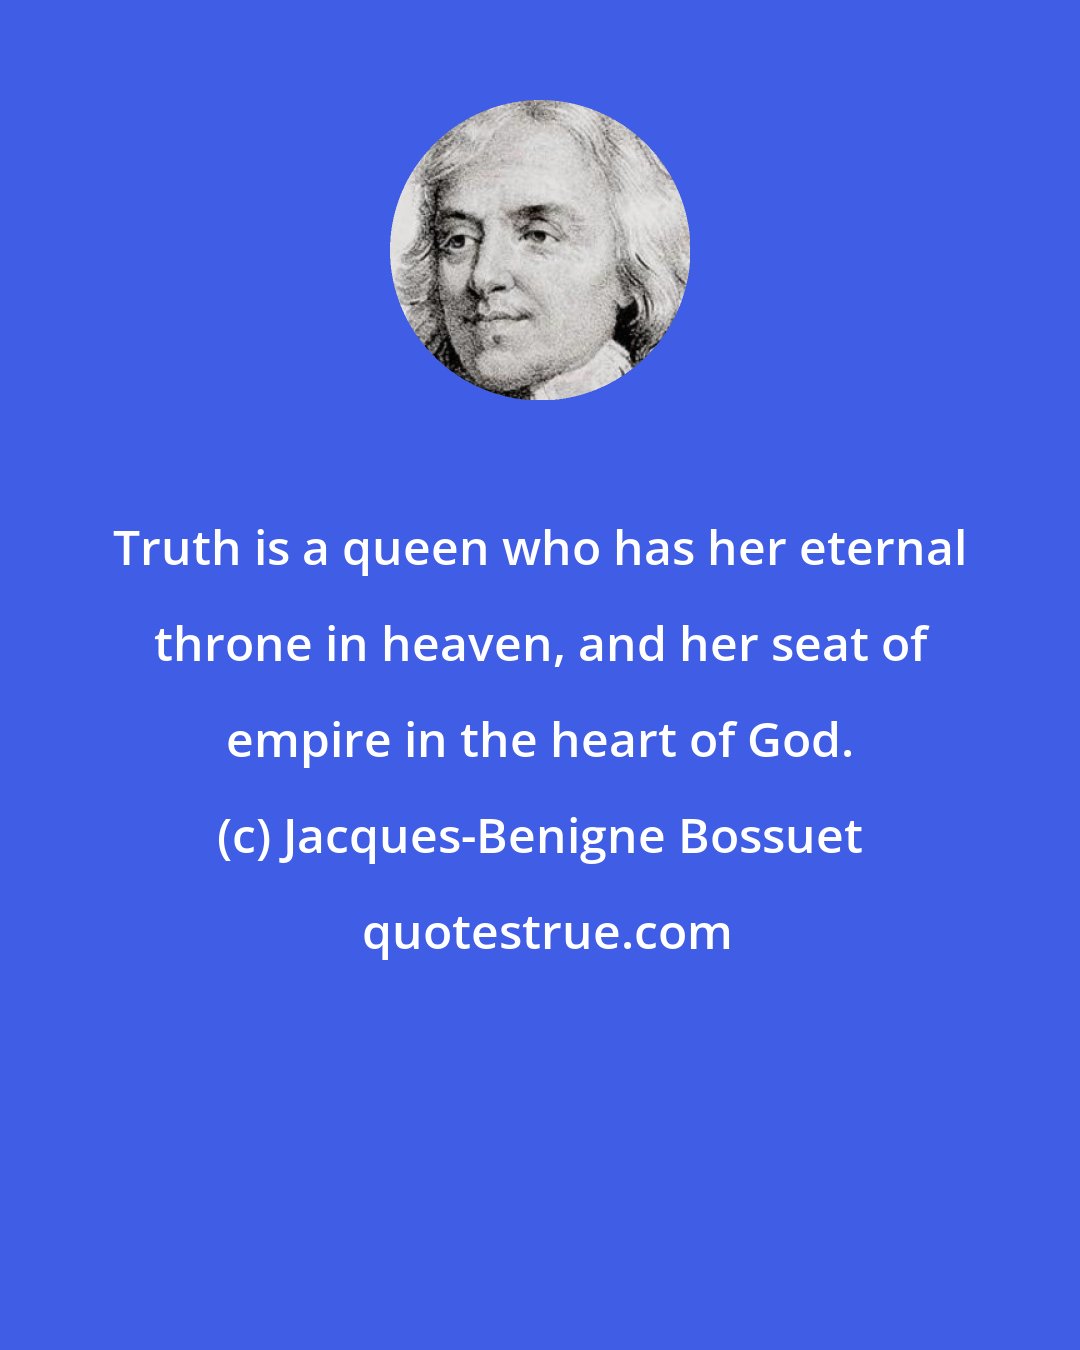 Jacques-Benigne Bossuet: Truth is a queen who has her eternal throne in heaven, and her seat of empire in the heart of God.